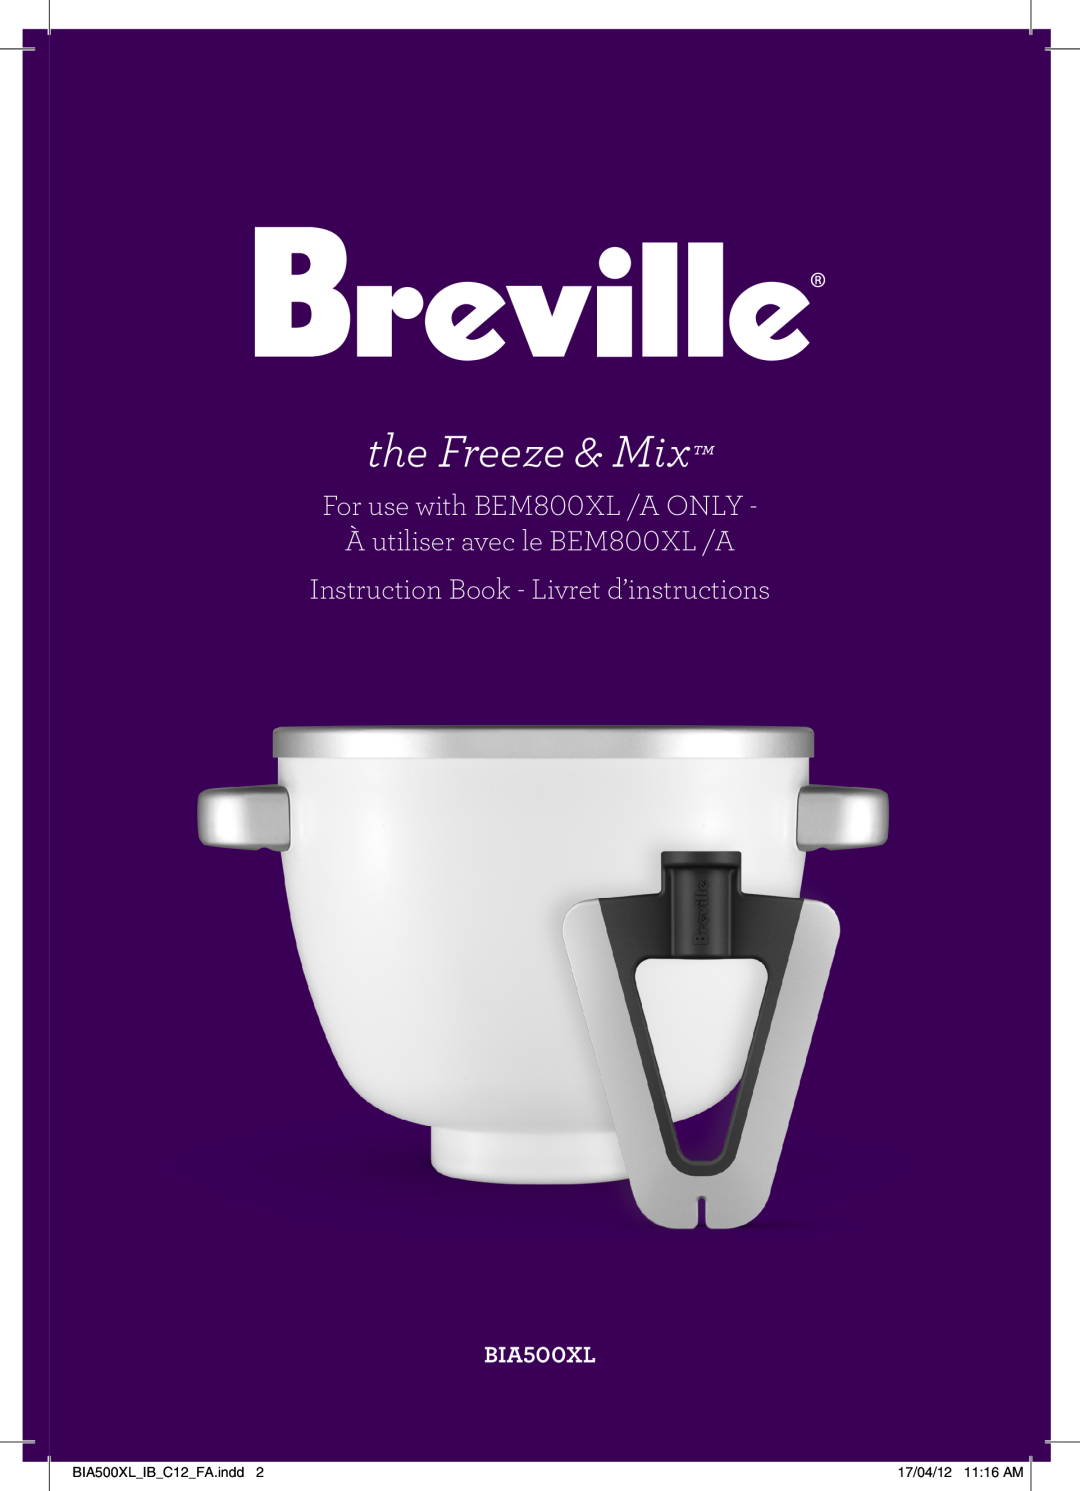 Breville manual the Freeze & Mix, For use with BEM800XL /A ONLY, BIA500XLIBC12FA.indd, 17/04/12 1116 AM 